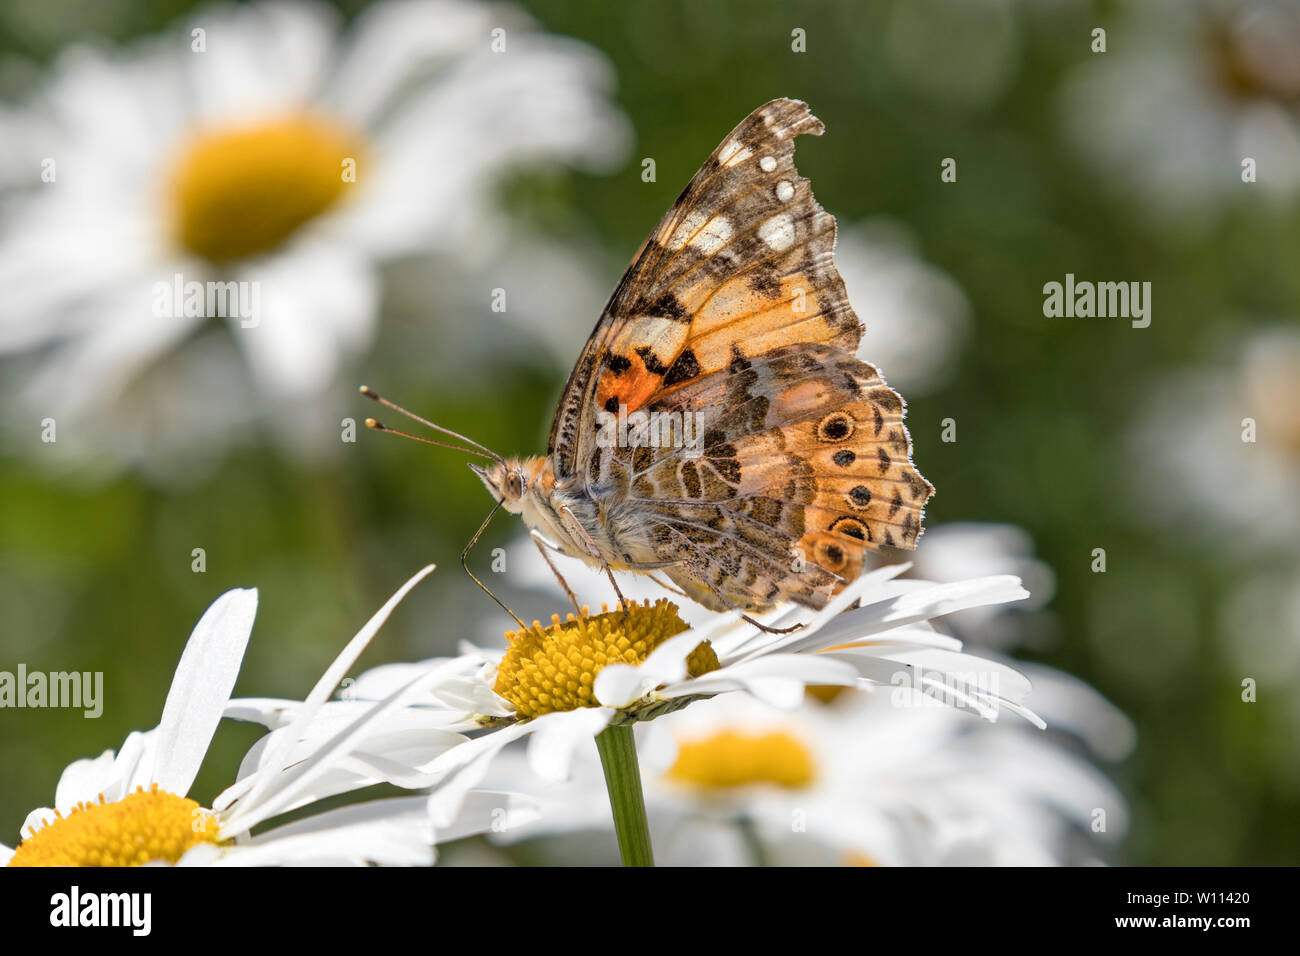 Teesdale, County Durham, UK. 28th June, 2019. UK Weather. The hot weather which has swept all the way across Europe from the Sahara has brought the annual migration of Painted Lady (Vanessa cardui) butterflies to Northern England. Helped by warm southerly winds these amazing butterflies will have flown all the way from the desert fringes of North Africa, the Middle East and Central Asia! Credit: David Forster/Alamy Live News Stock Photo